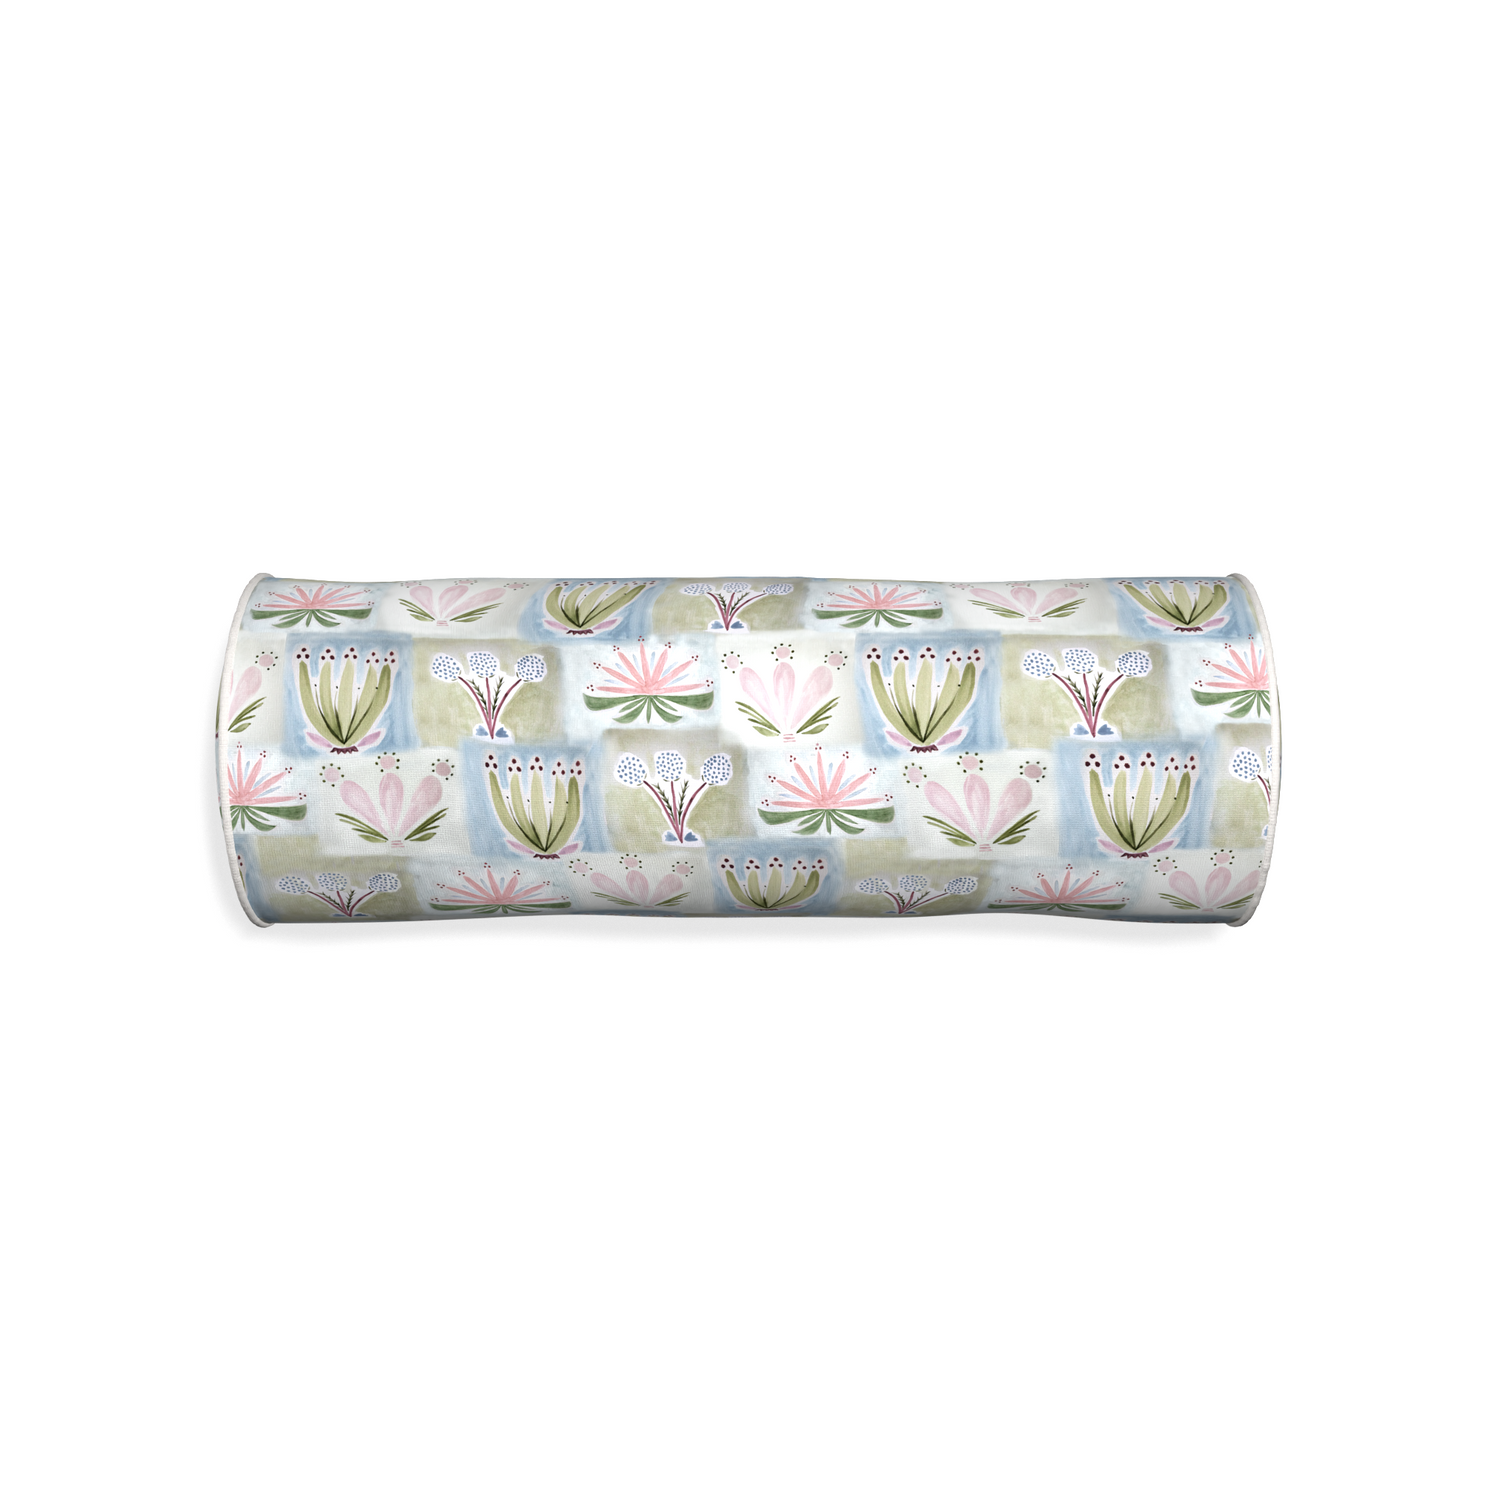 Bolster harper custom pillow with snow piping on white background